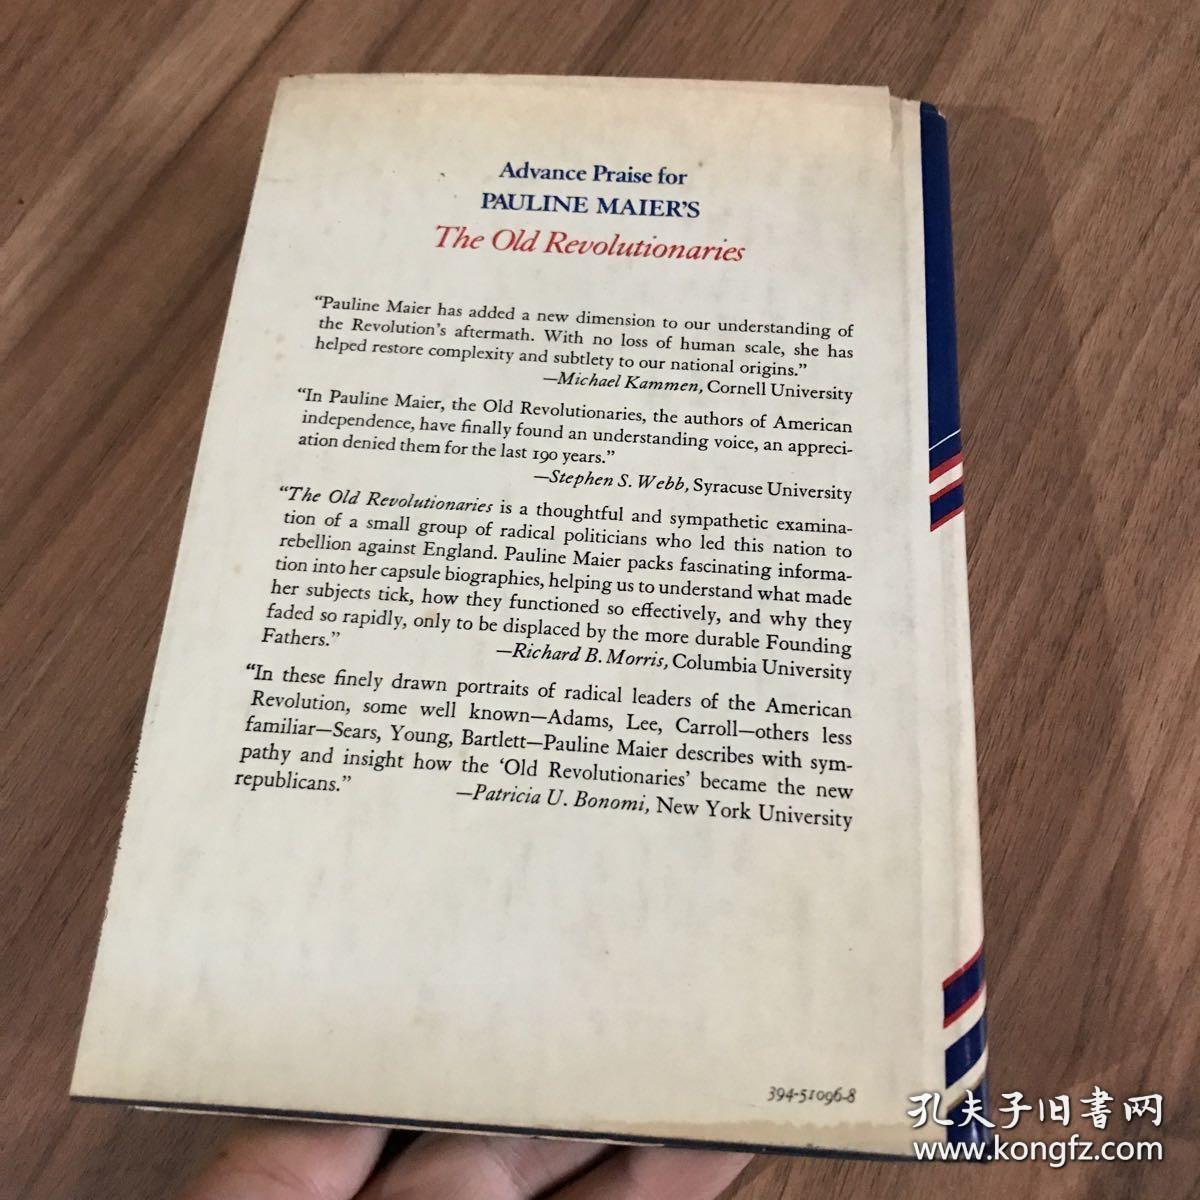 THE  OLD  REVOLUTIONARIES
Political  Lives  in  the  Age  of  Samuel  Adams
老革命者   亚当斯时代的政治生活
by  Pauline  Maier    1980年 毛边本